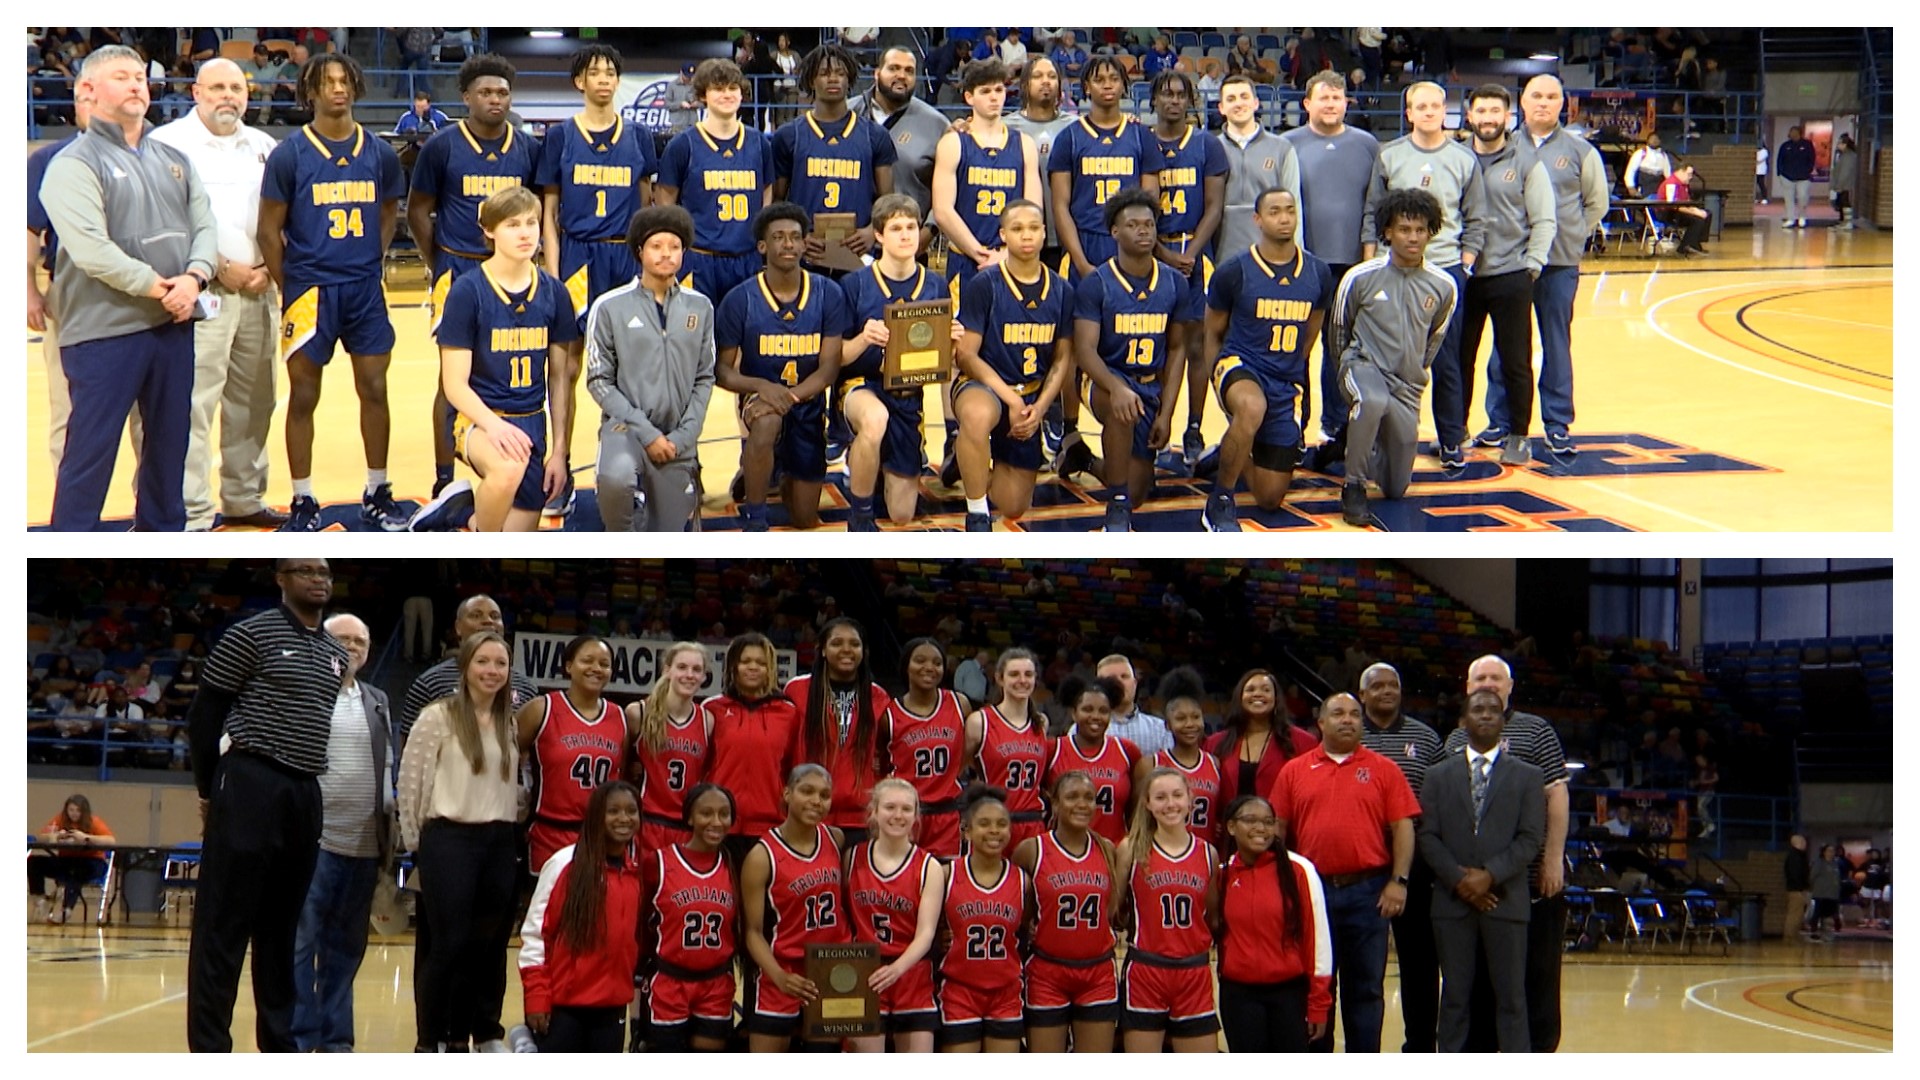 The road to the AHSAA State Finals continued with NW Regional action at Wallace St. Several teams from the Tenn. Valley had a chance to capture Regional Titles